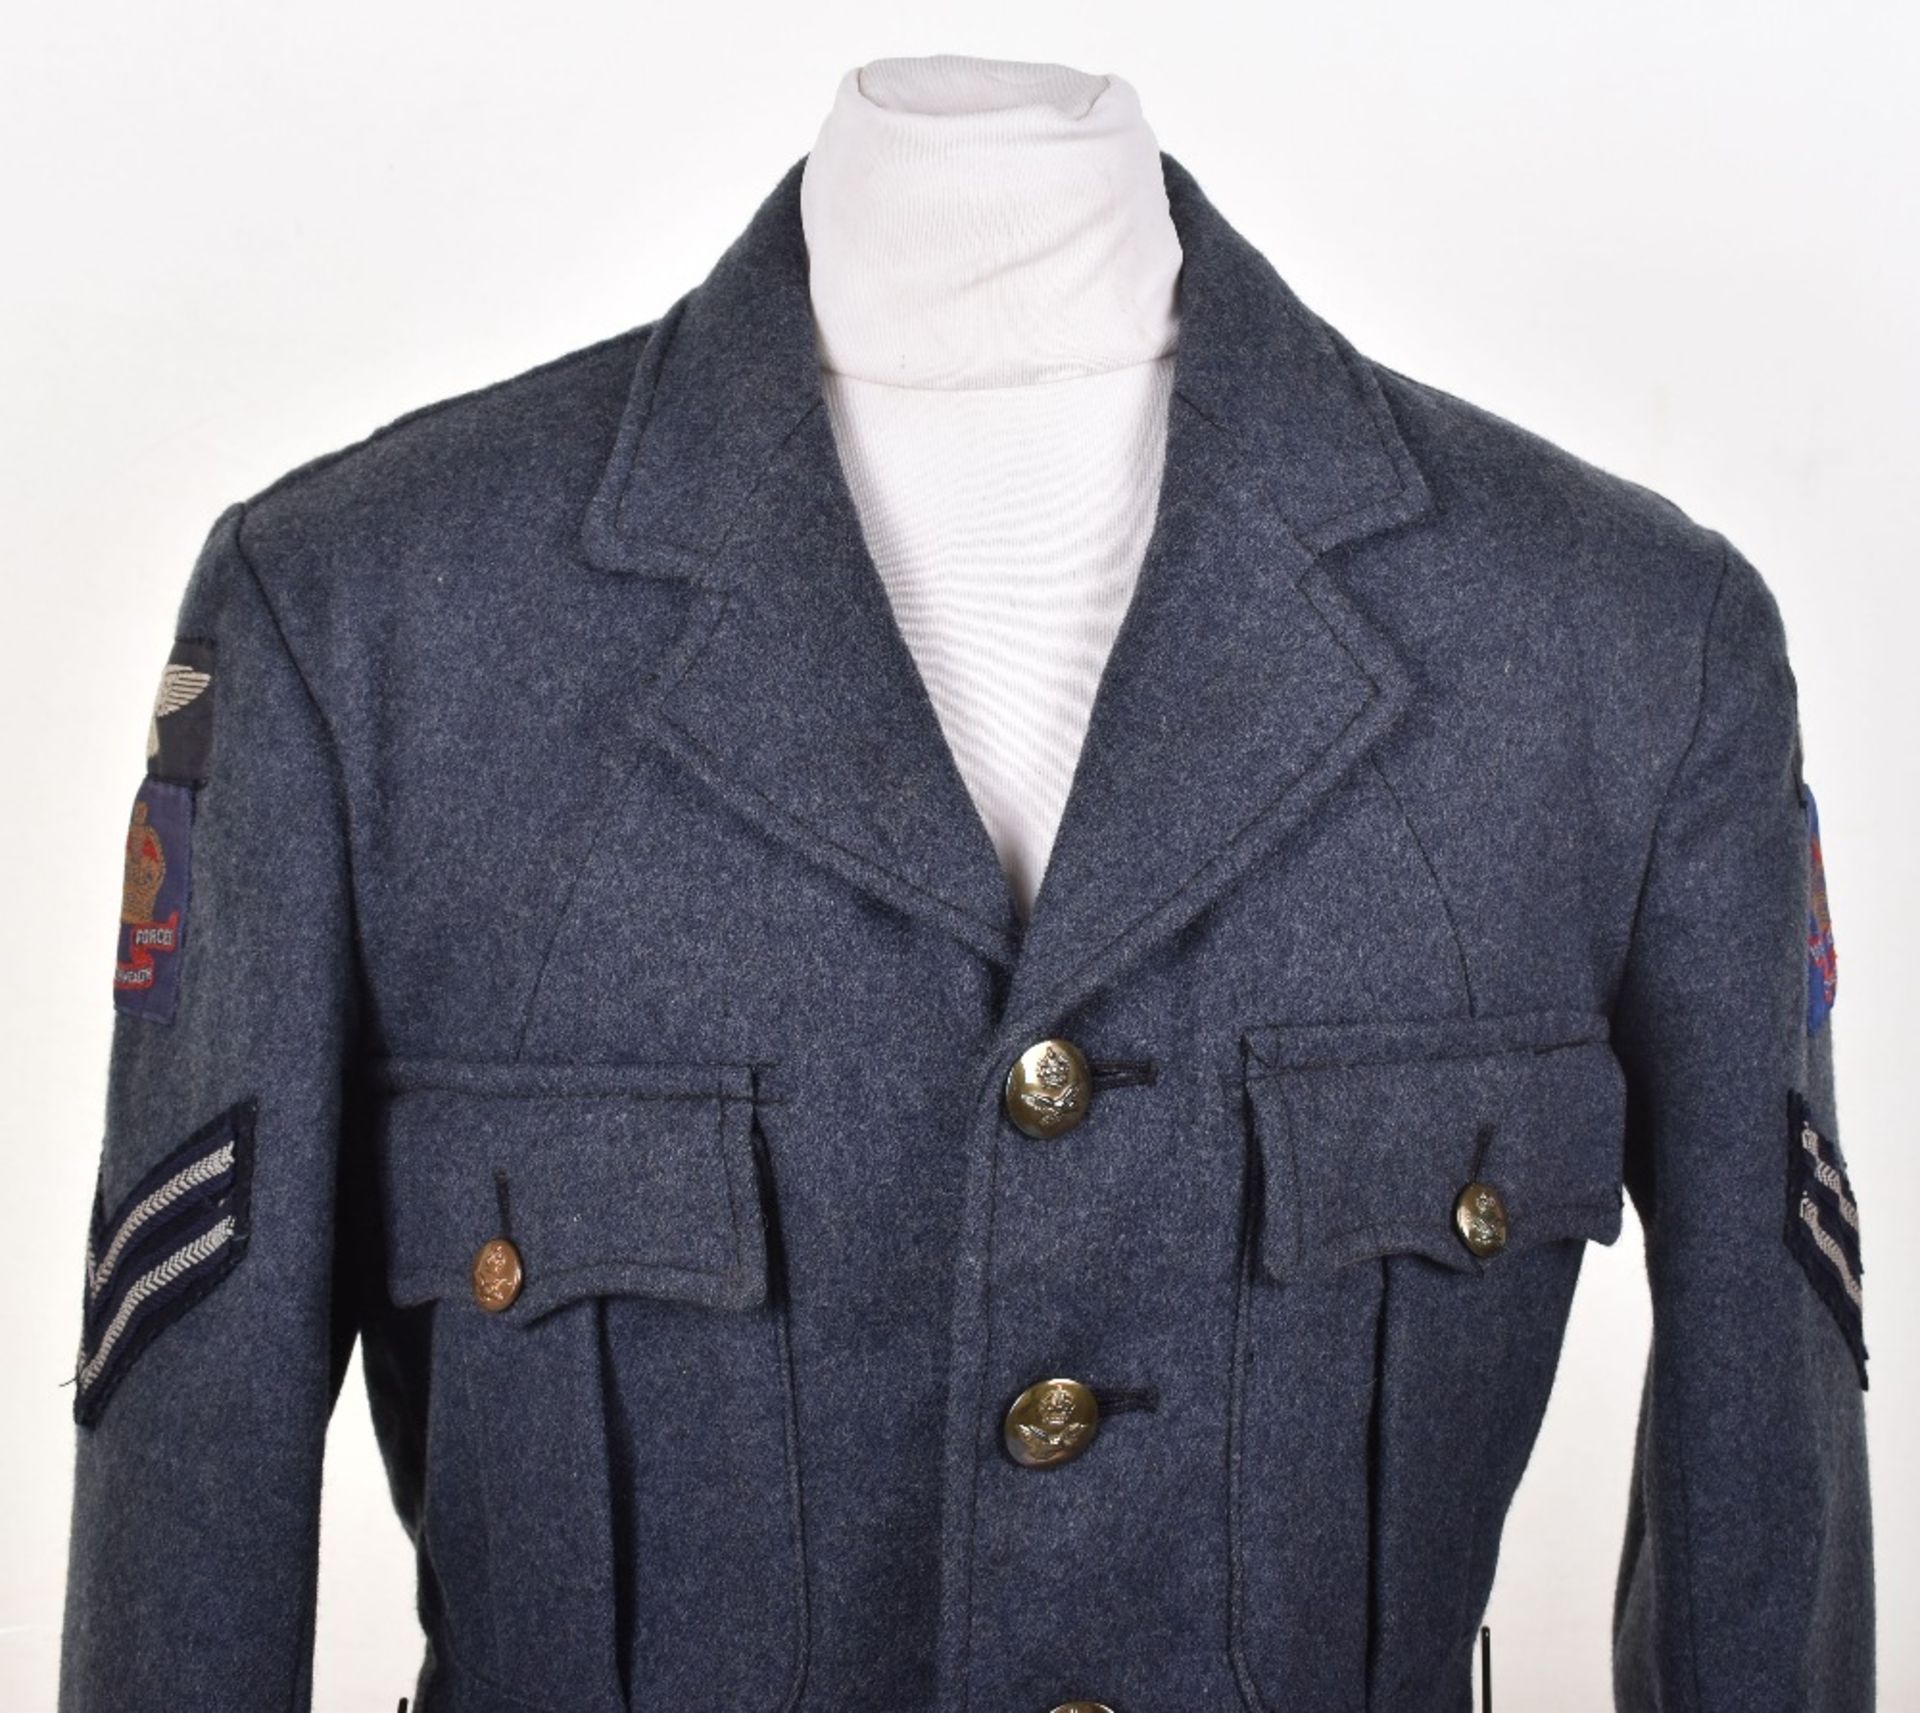 Scarce Royal Air Force Other Ranks Tunic with Insignia for British Commonwealth Occupation Force Jap - Image 6 of 10